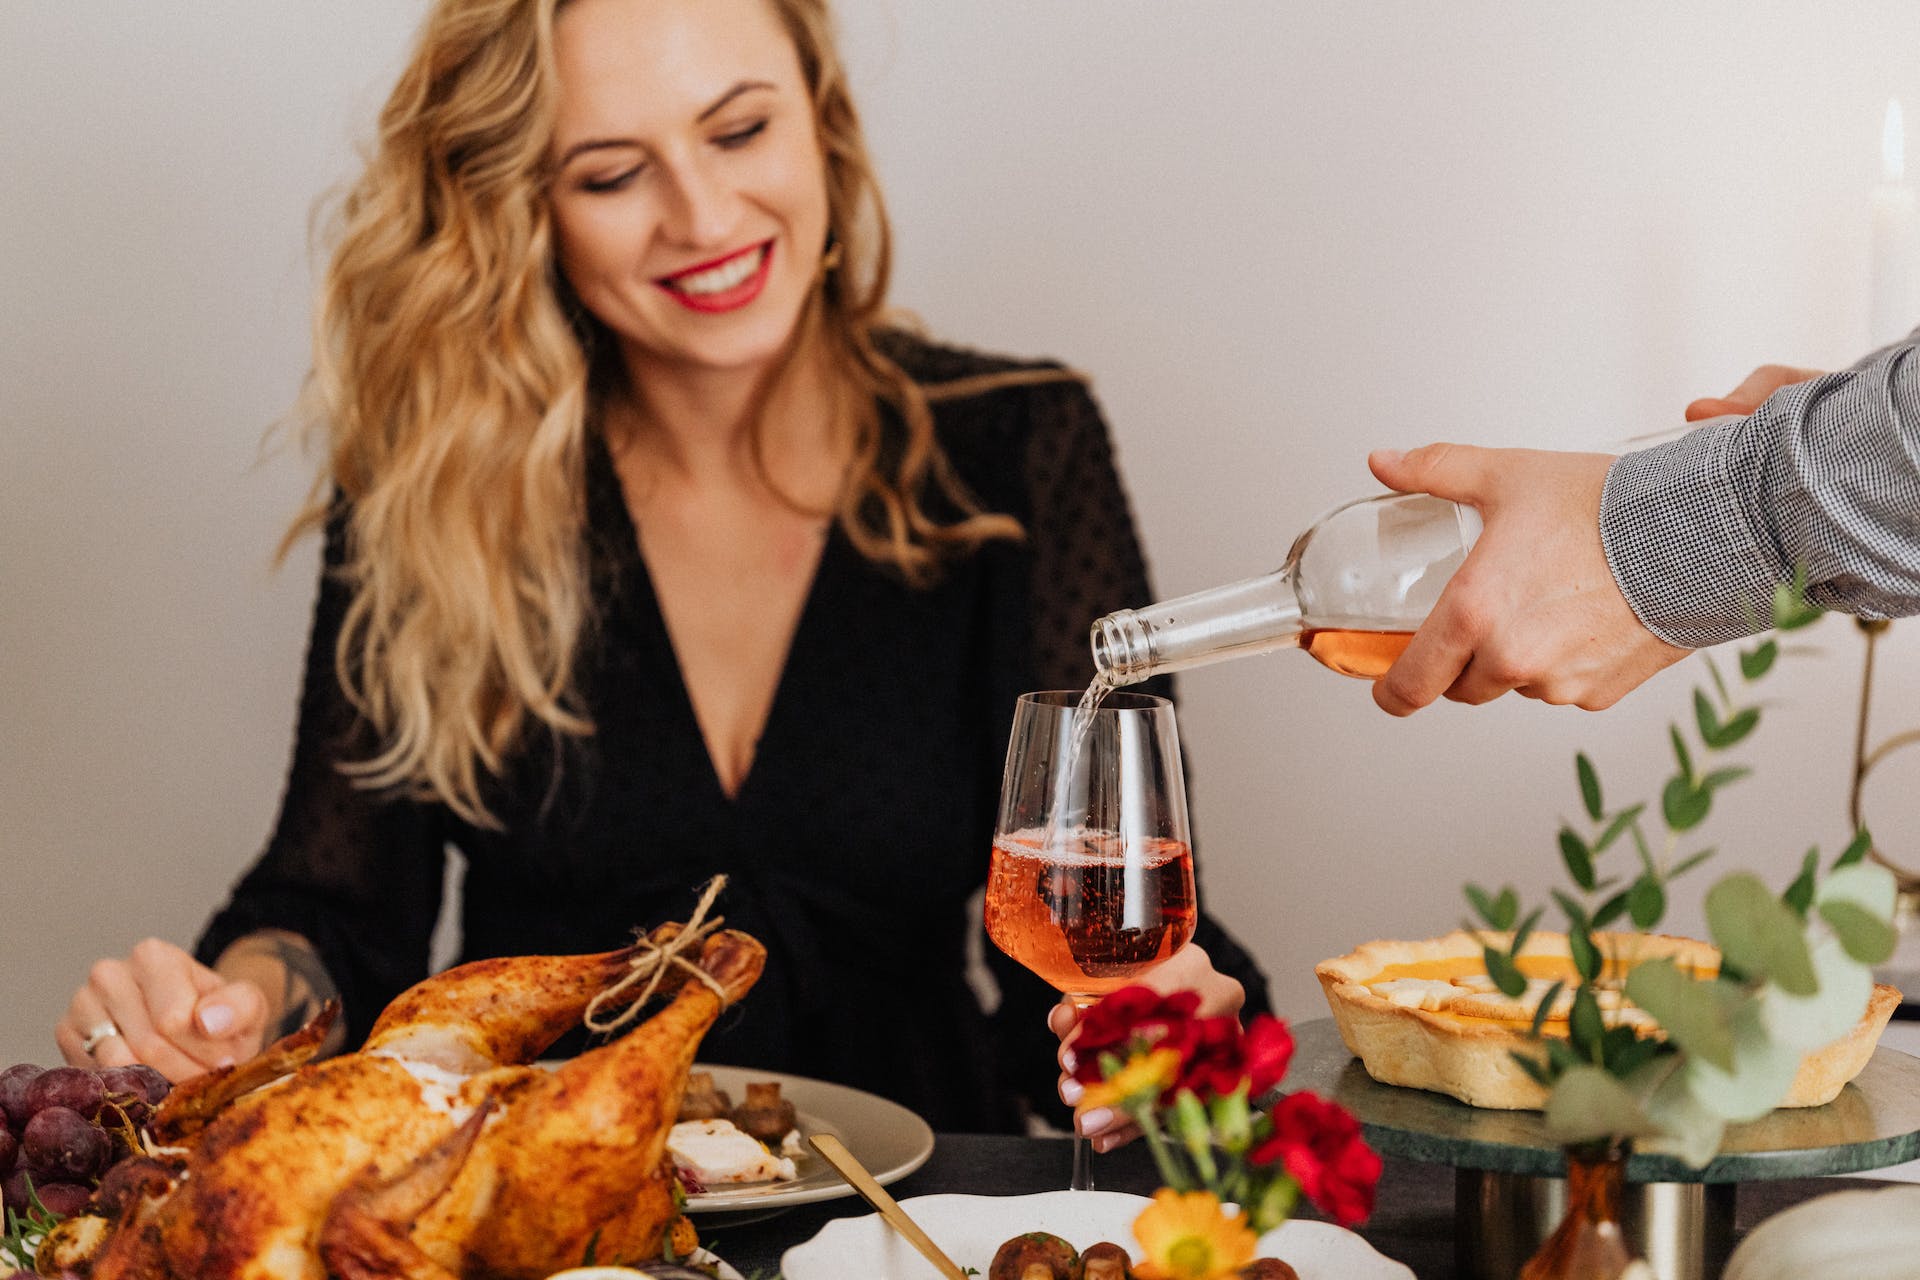 Man pouring wine into woman's glass | Source: Pexels